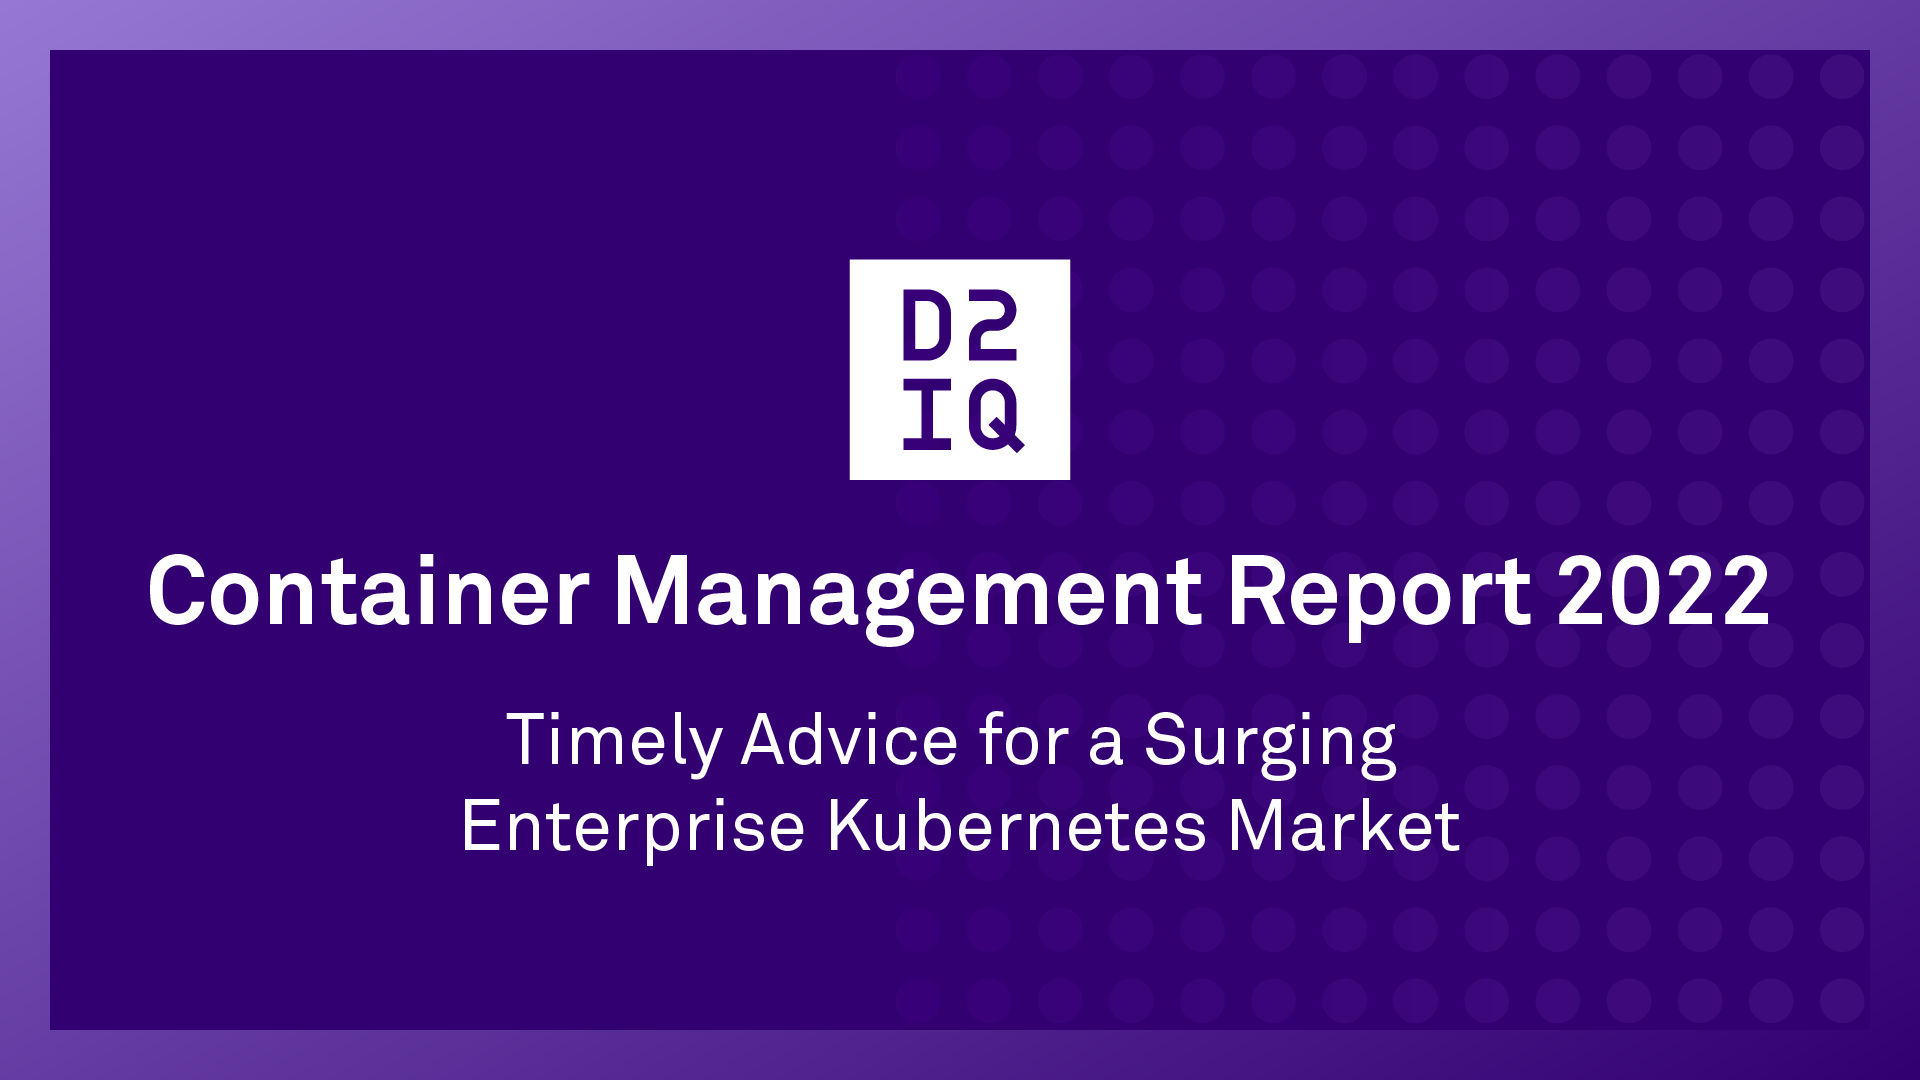 Container Management Report 2022: Timely Advice for a Surging Enterprise Kubernetes Market